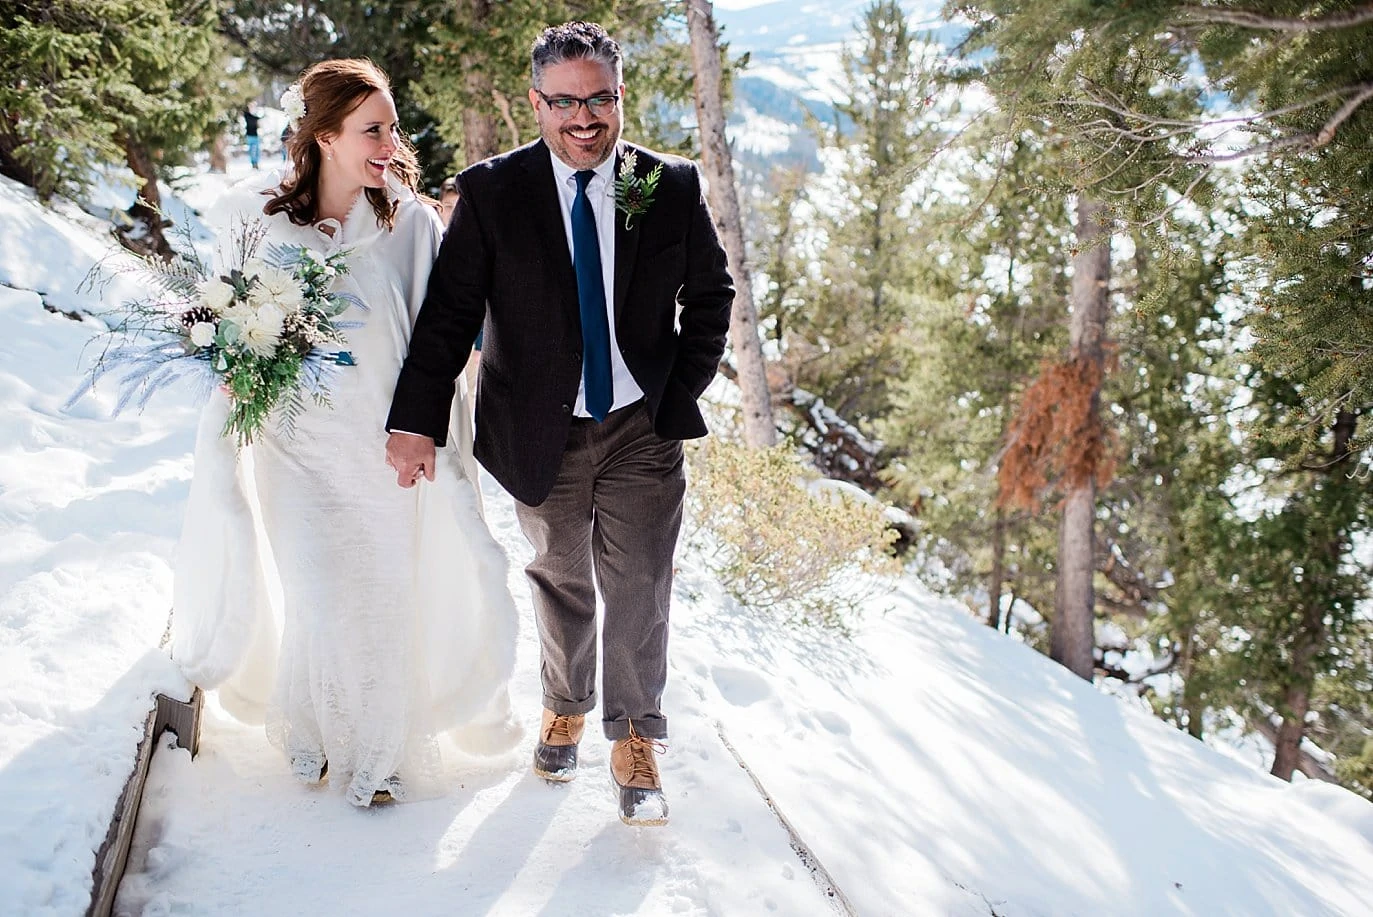 bride and groom walk in snow at Sapphire Point Elopement by Dillon wedding photographer Jennie Crate Photographer